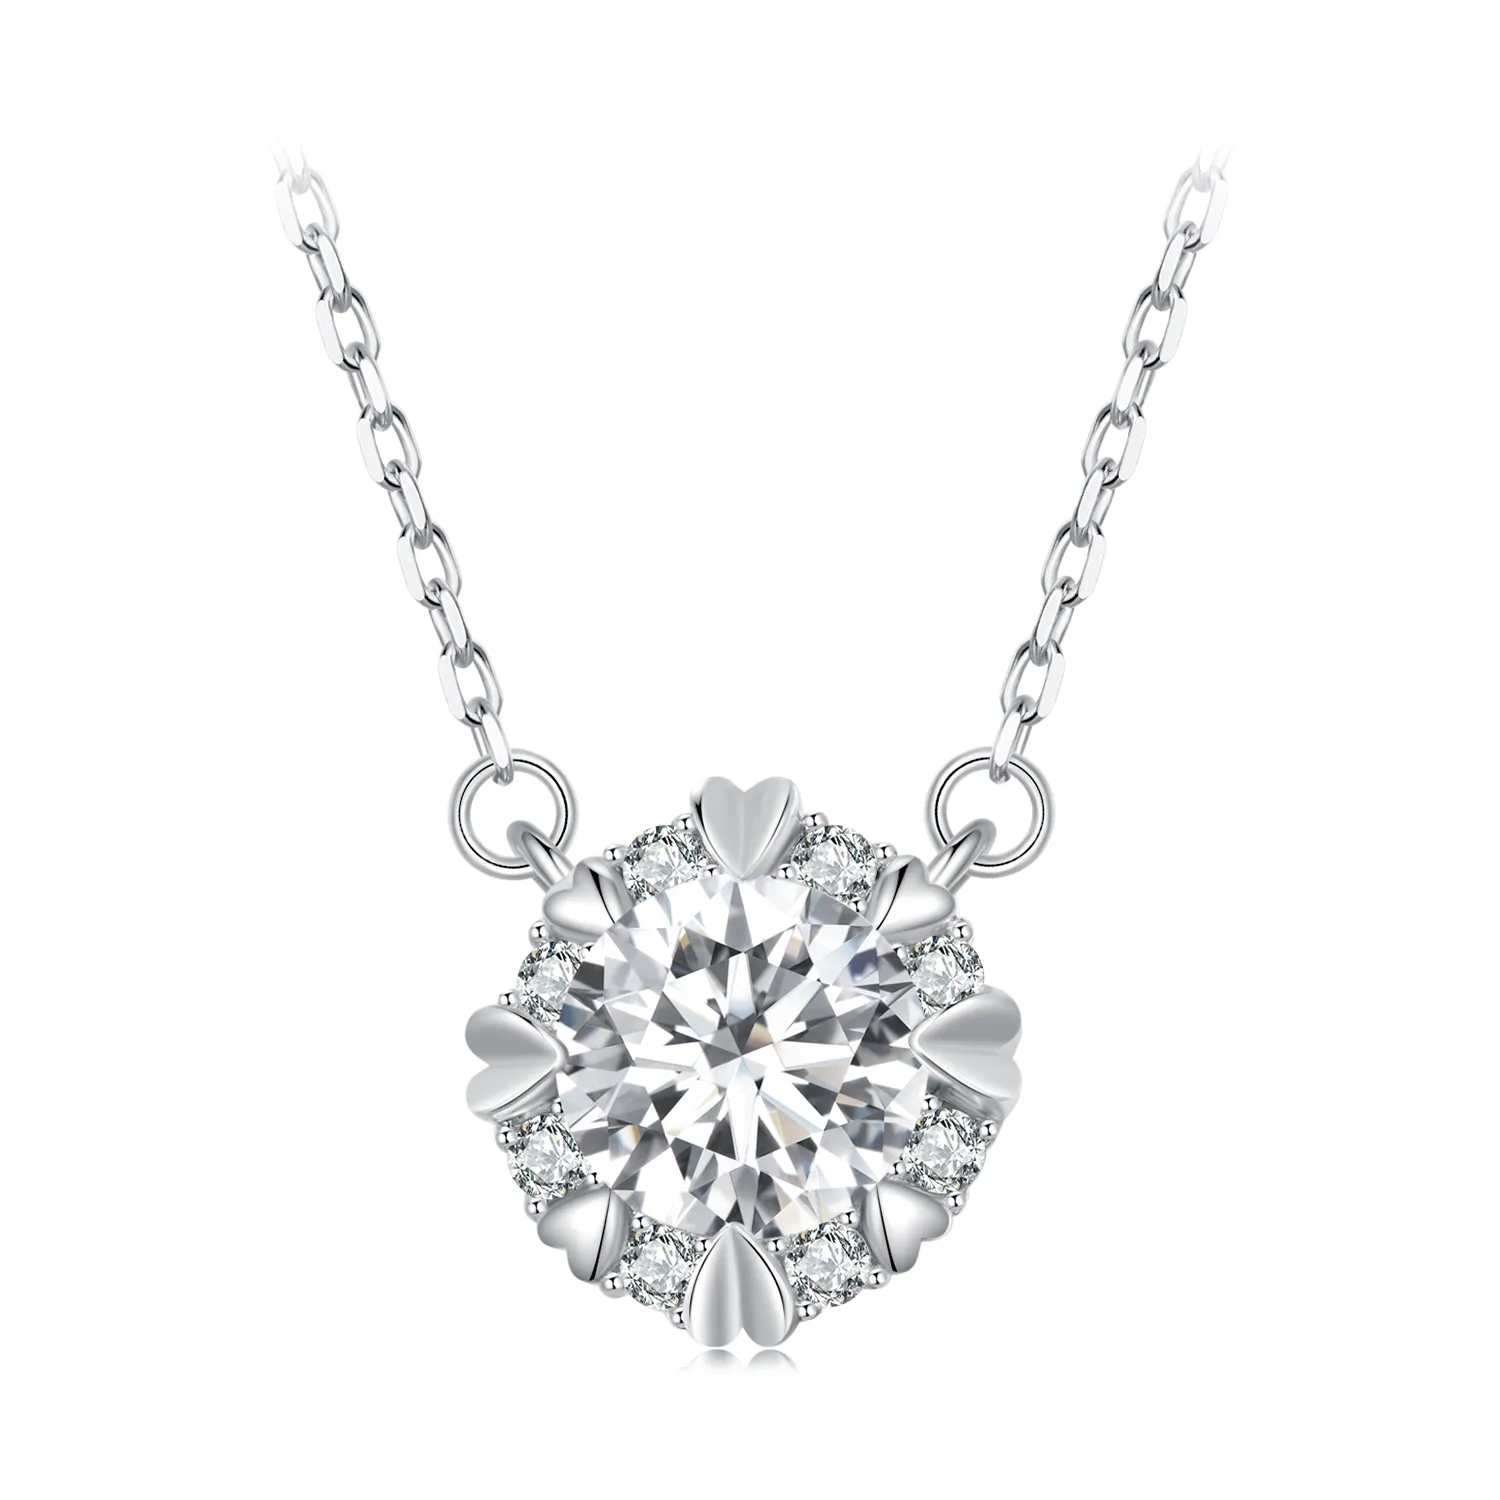 Pandora Style Exquisite Moissanite Necklace(One Certificate) - MSN011